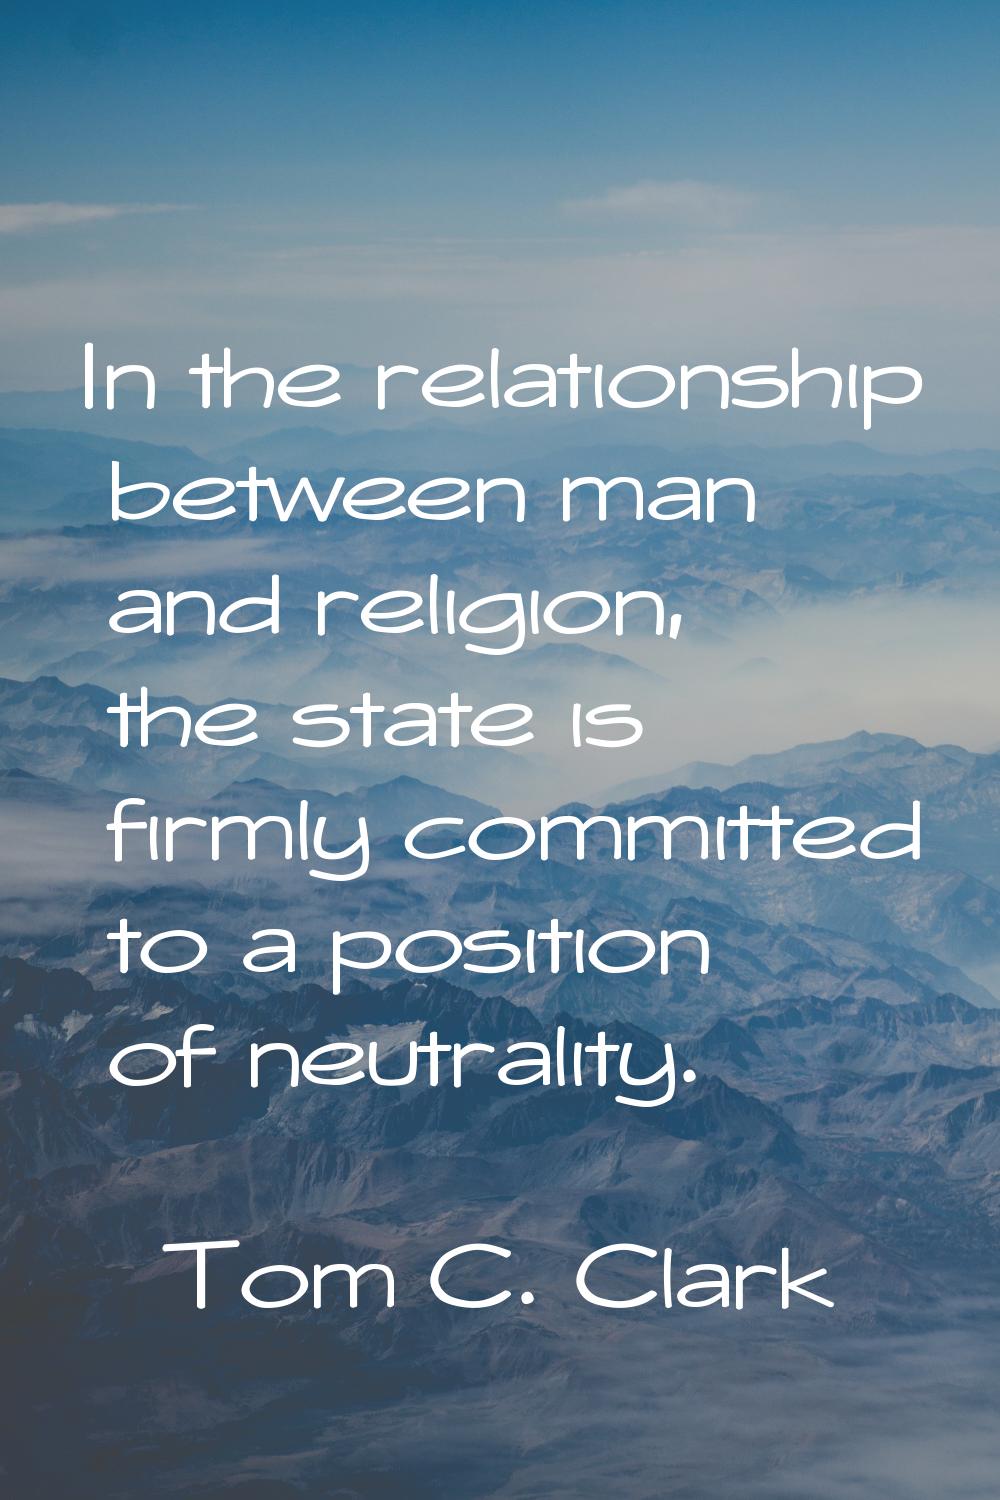 In the relationship between man and religion, the state is firmly committed to a position of neutra